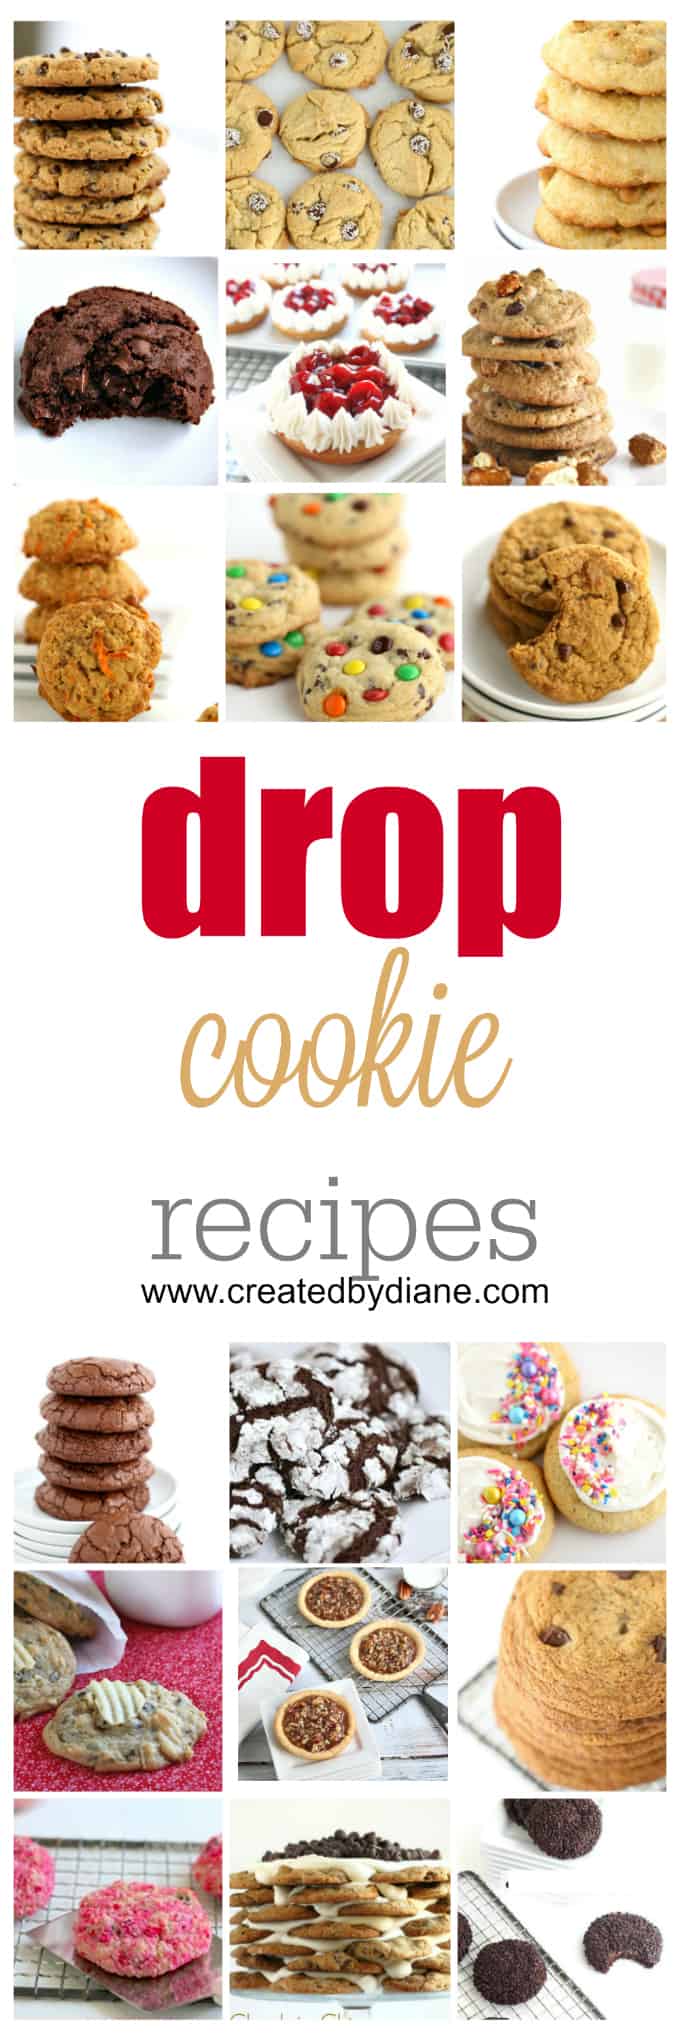 drop cookie recipes that are easy to make www.createdbydiane.com